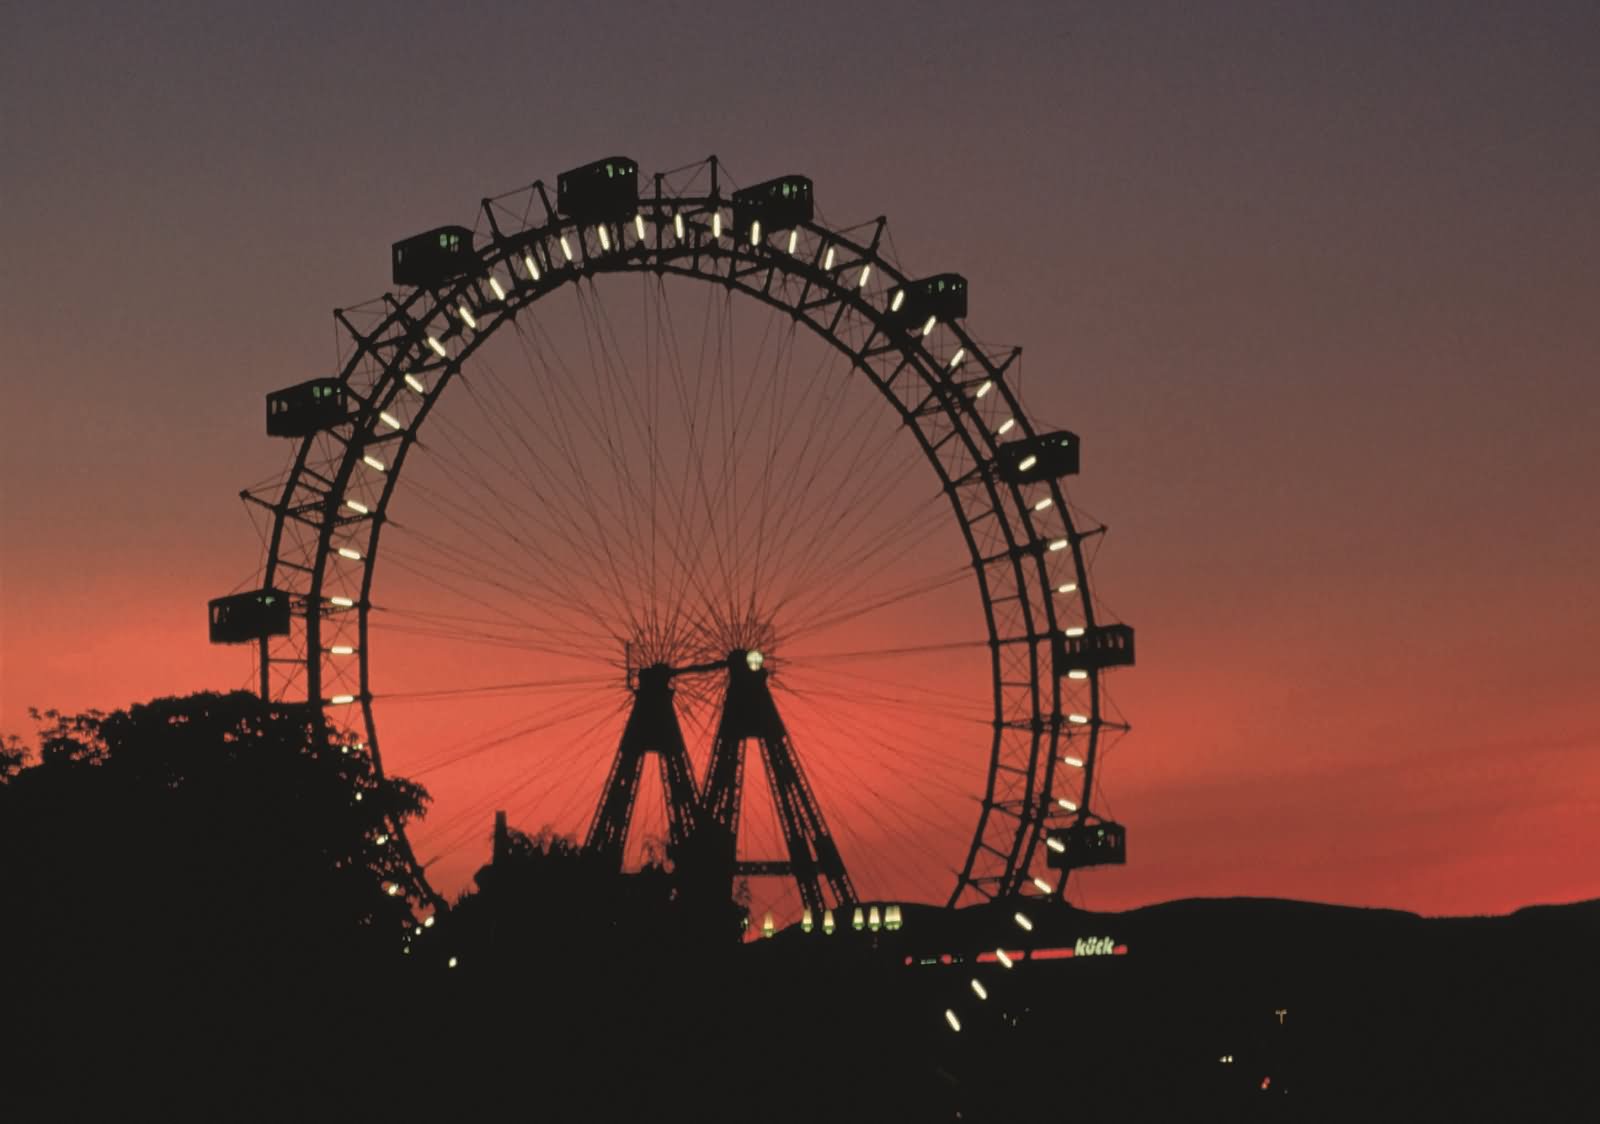 Adorable View Of The Wiener Riesenrad During Sunset